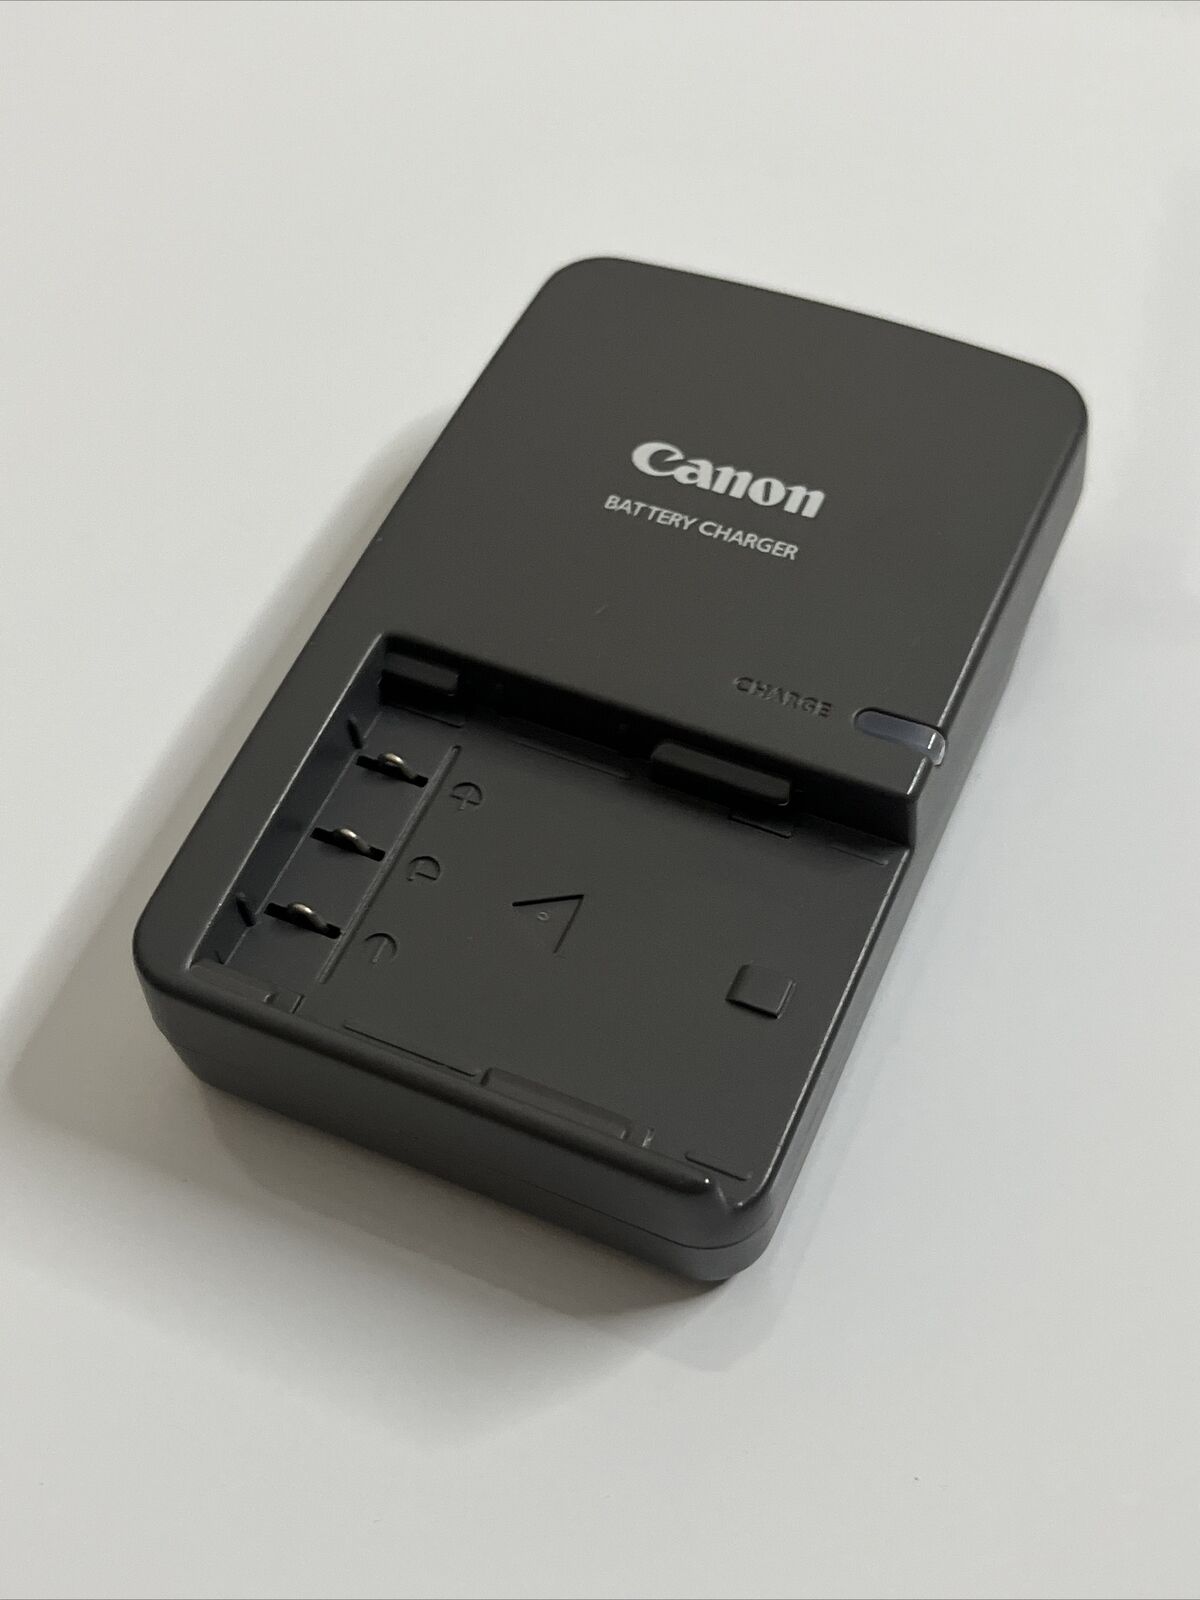 Genuine Canon Battery Charger CB-2LW for NB-2L NB-2LH Batteries 100-240V